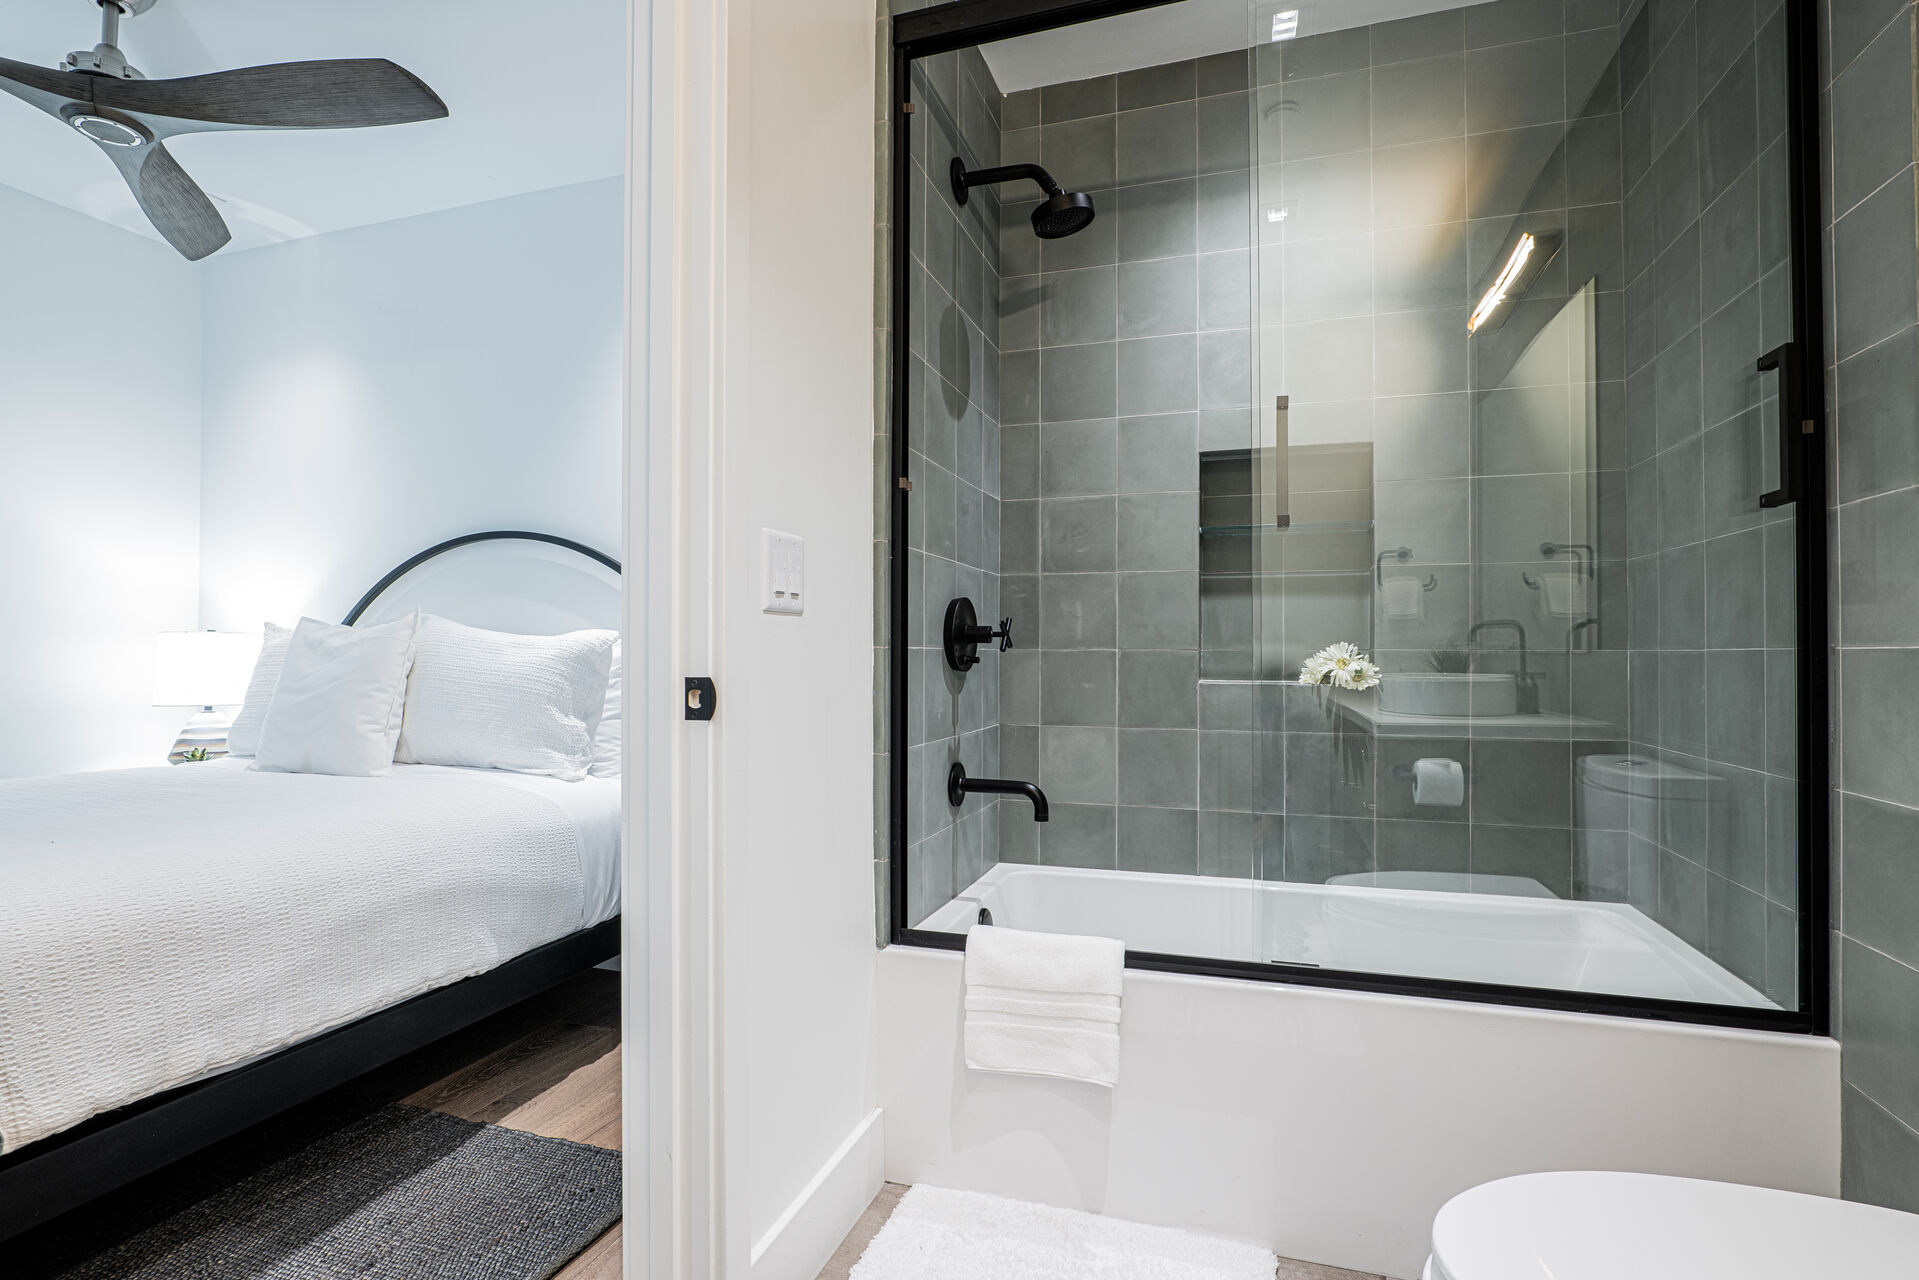 Bedroom 3 (third level) – Queen size bed, and the en-suite bathroom offers a glass and tile shower